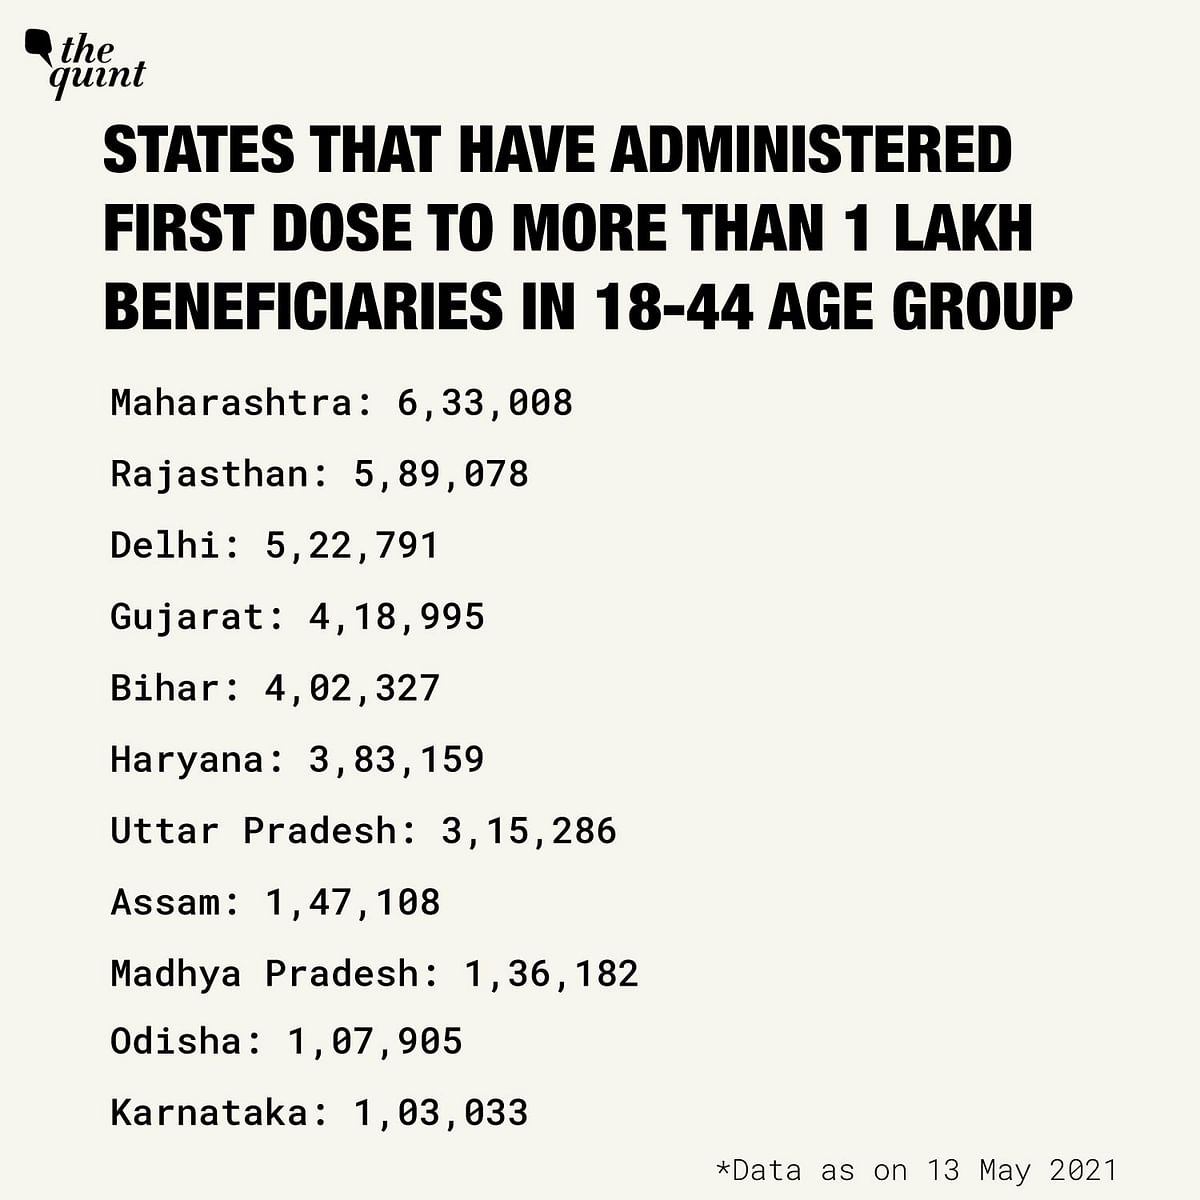 Maha and Now Delhi: Which States Have Halted Vaccines for 18-44?